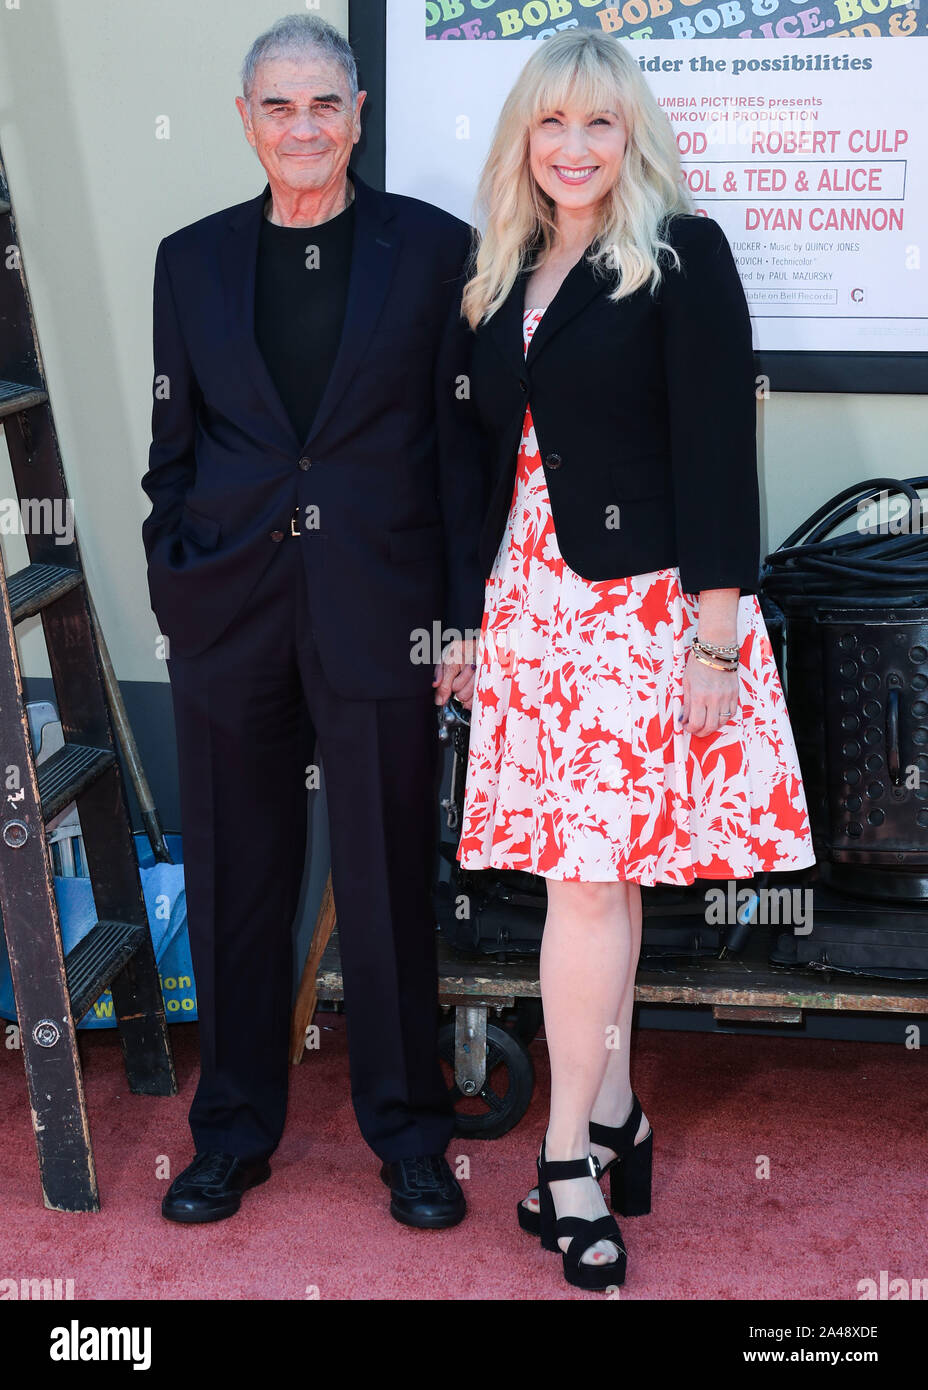 Hollywood, United States. 22nd July, 2019. (FILE) Robert Forster Dies At 78. HOLLYWOOD, LOS ANGELES, CALIFORNIA, USA - JULY 22: Actor Robert Forster and partner Evie Forster arrive at the World Premiere Of Sony Pictures' 'Once Upon a Time In Hollywood' held at the TCL Chinese Theatre IMAX on July 22, 2019 in Hollywood, Los Angeles, California, United States. (Photo by Xavier Collin/Image Press Agency) Credit: Image Press Agency/Alamy Live News Stock Photo